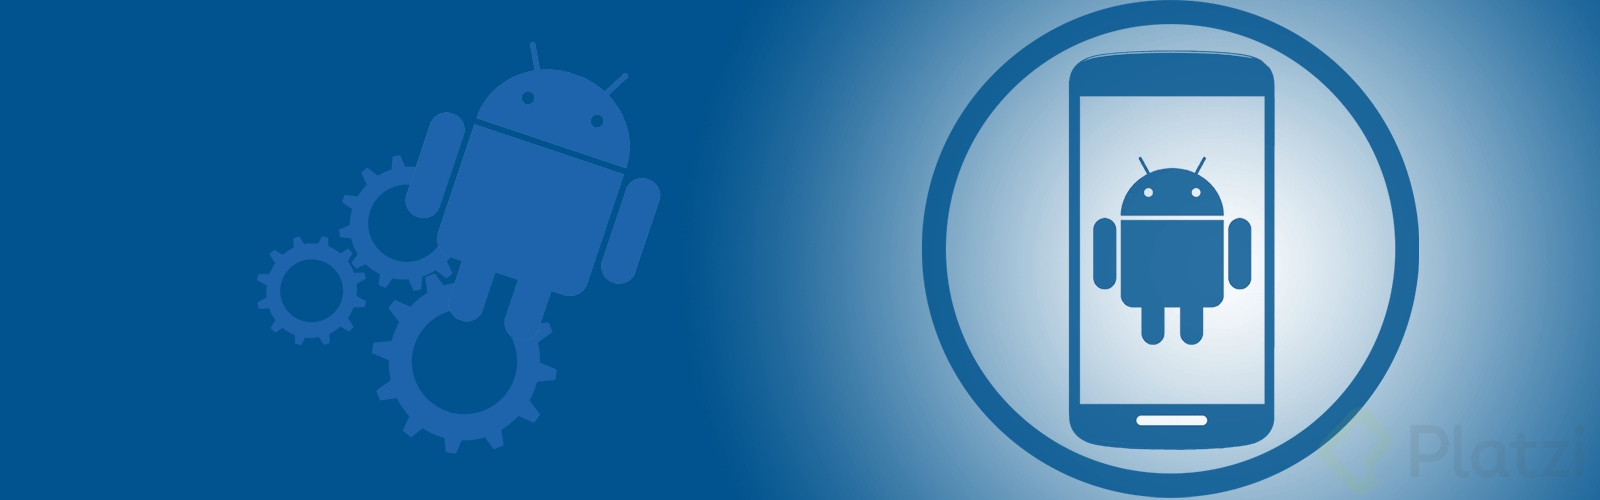 android-app-development-banner-1.png